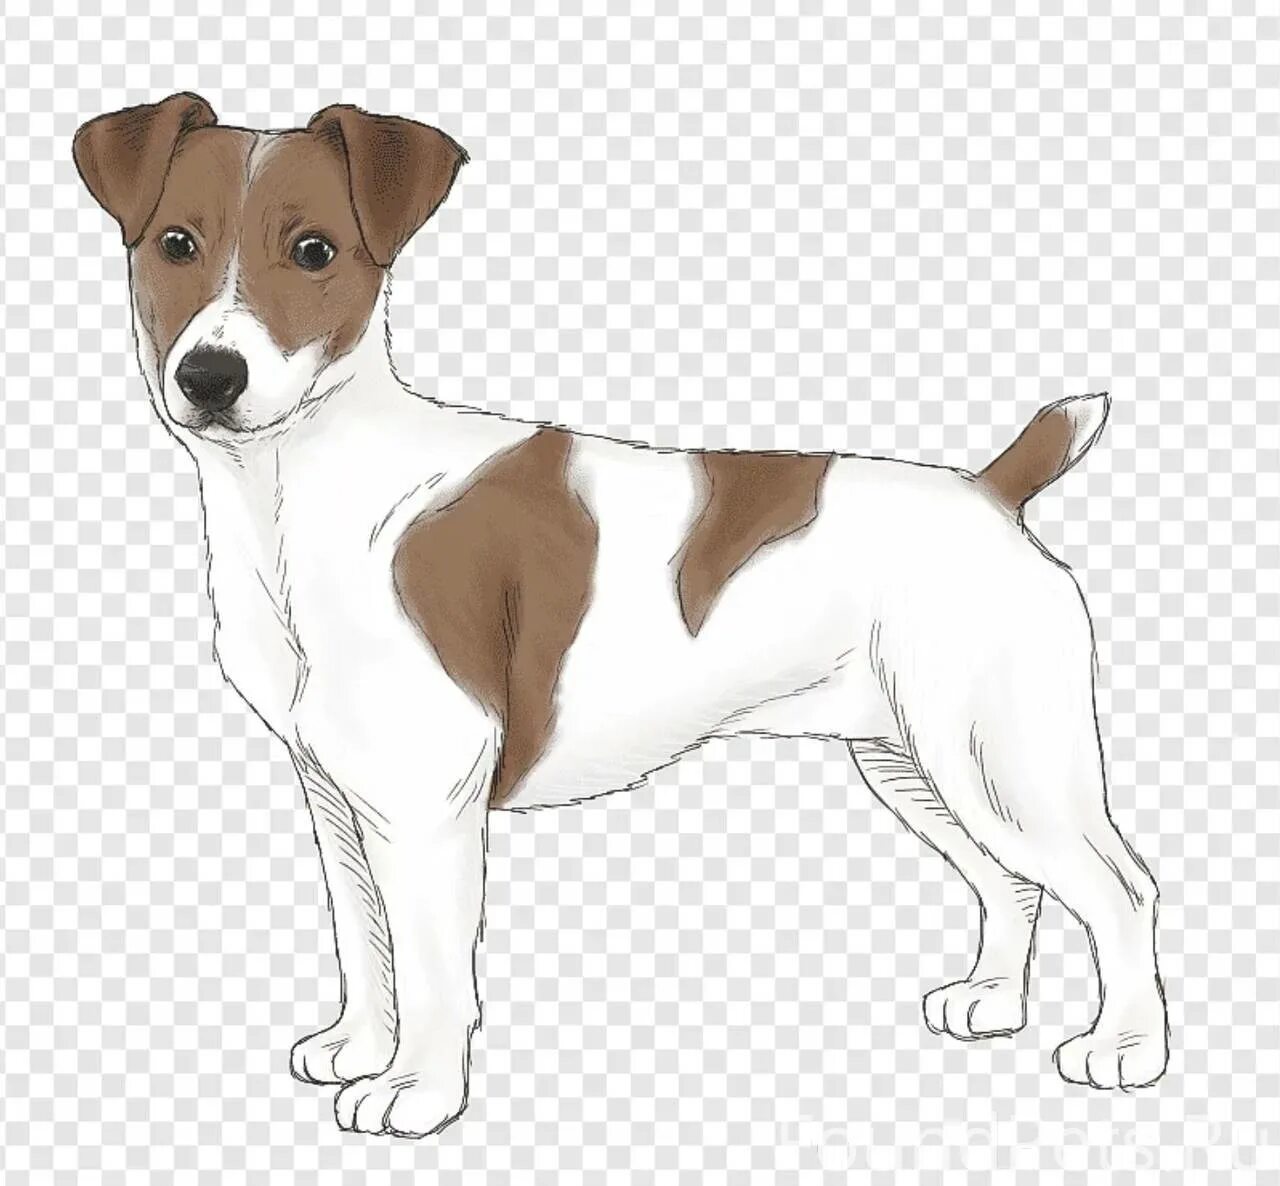 Jack russell terrier dog #3